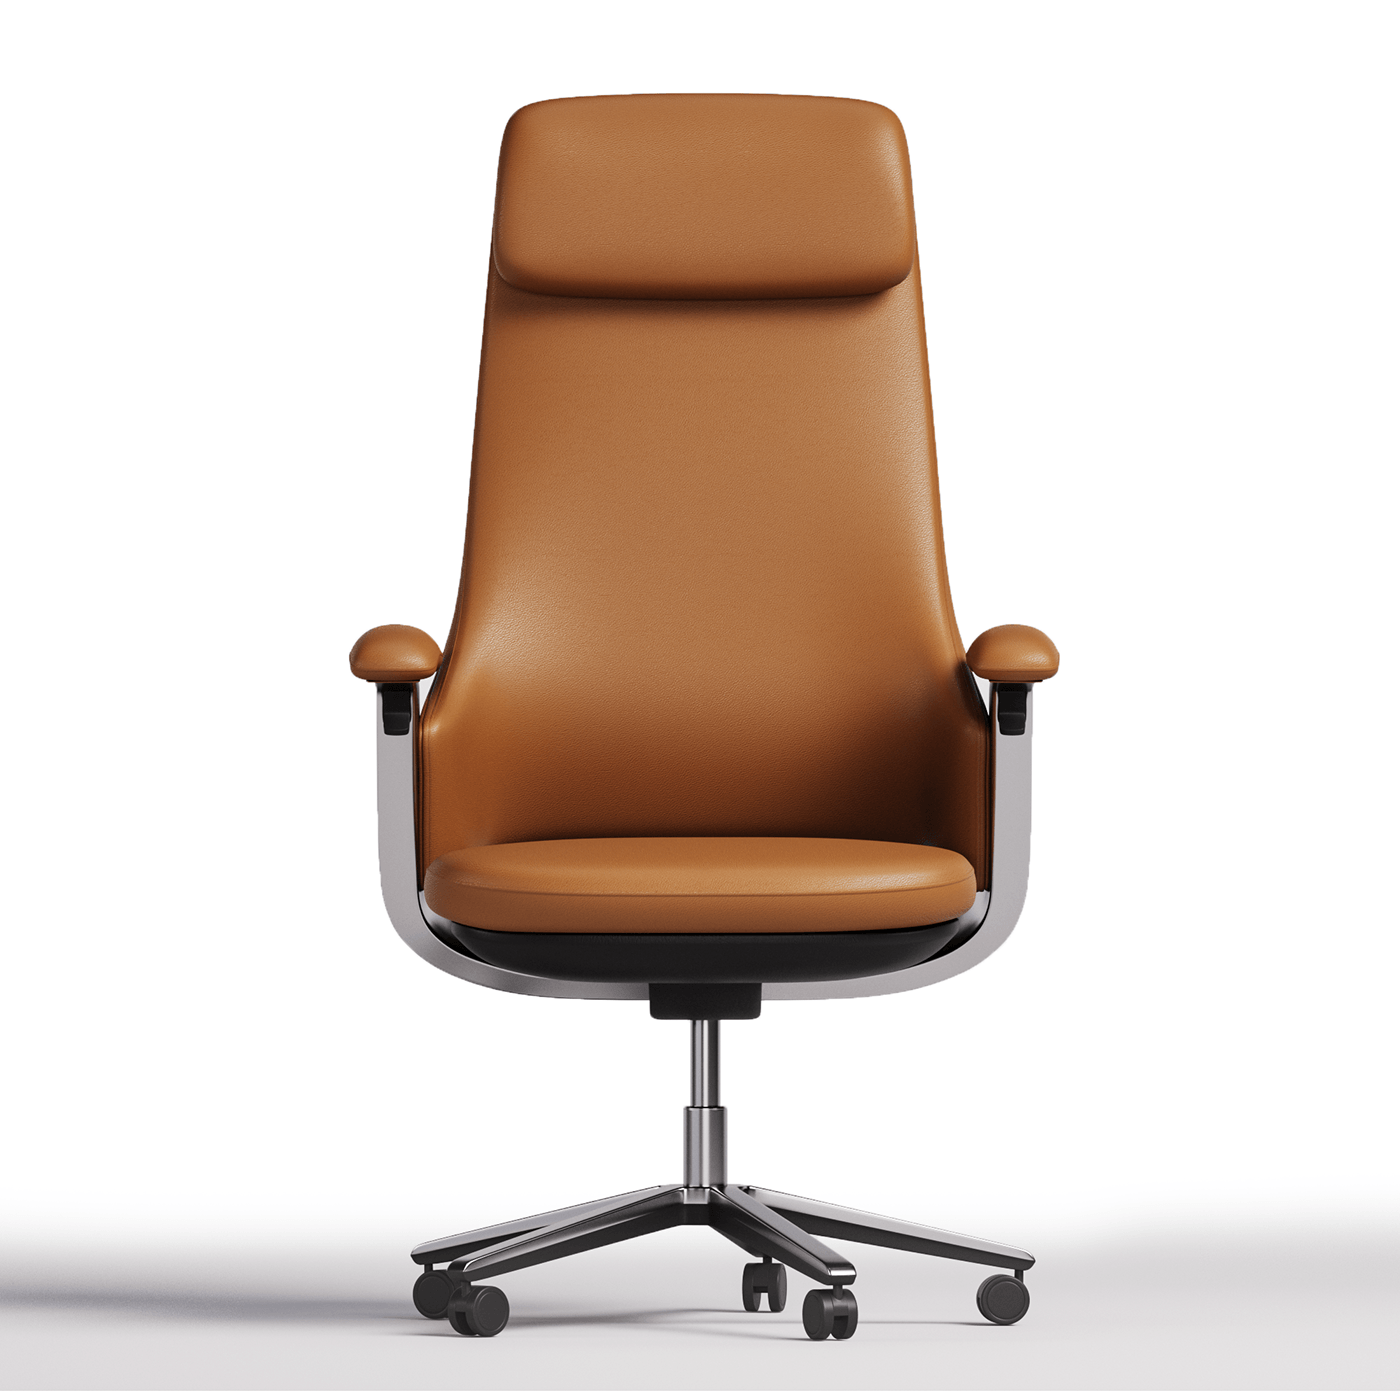 office furniture Office Design Office chair leather furniture interior design  product design  armcchair york